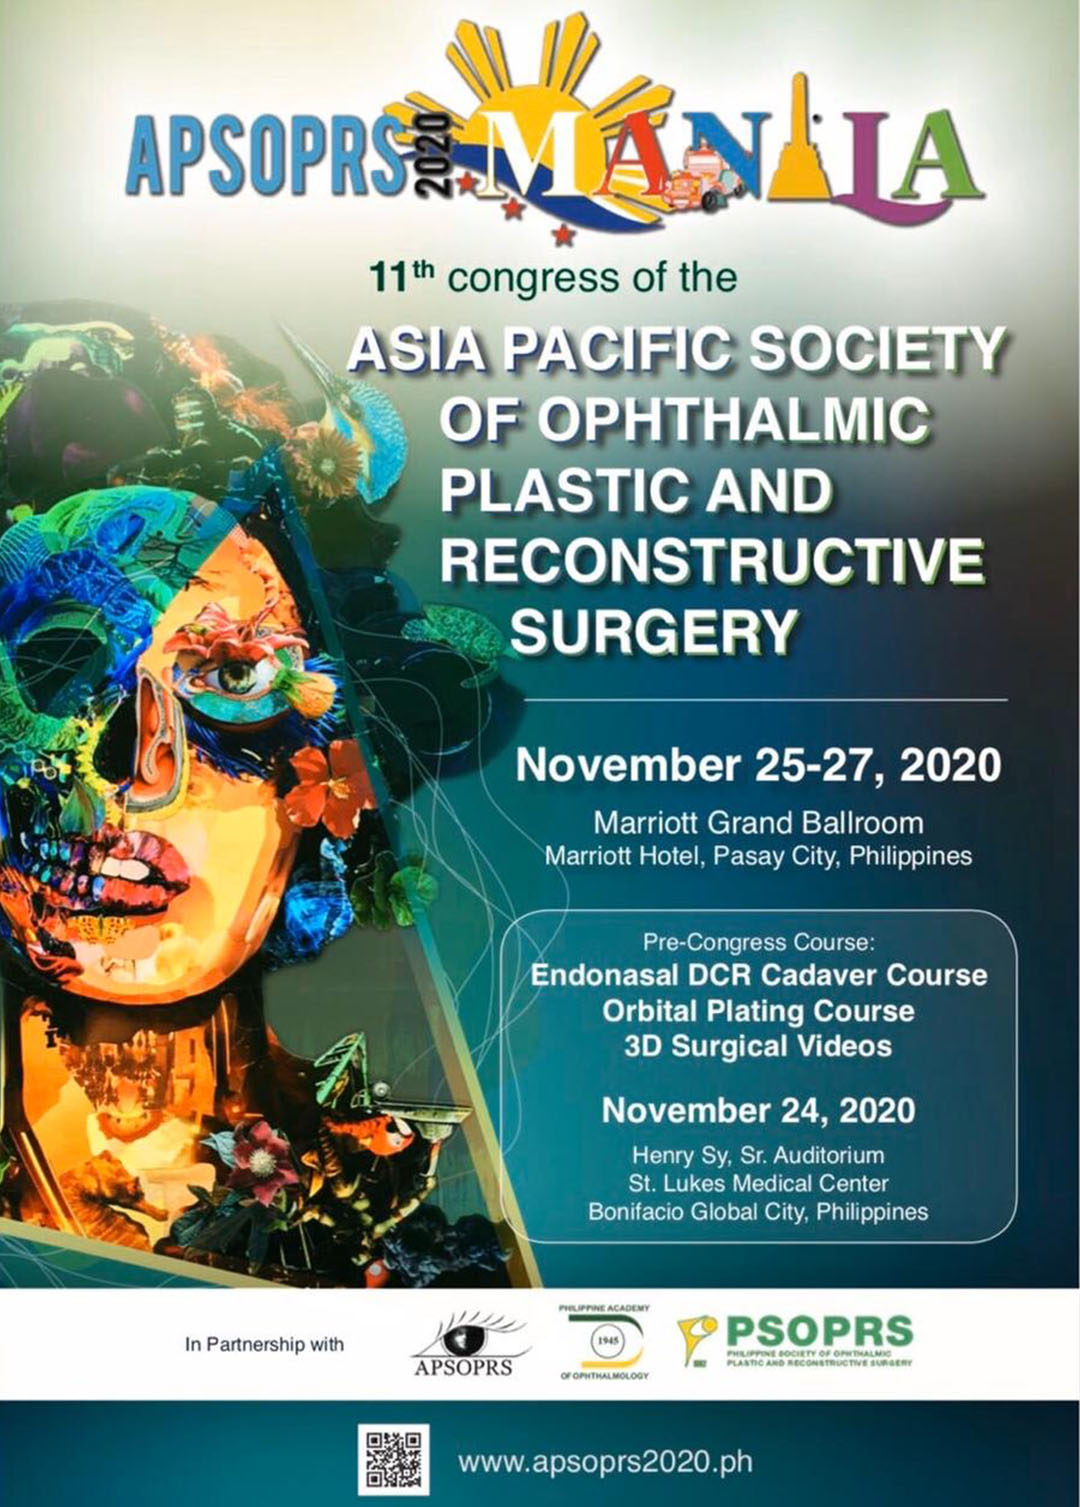 11th Congress of the Asia Pacific Society of Ophthalmic Plastic and Reconstructive Surgery